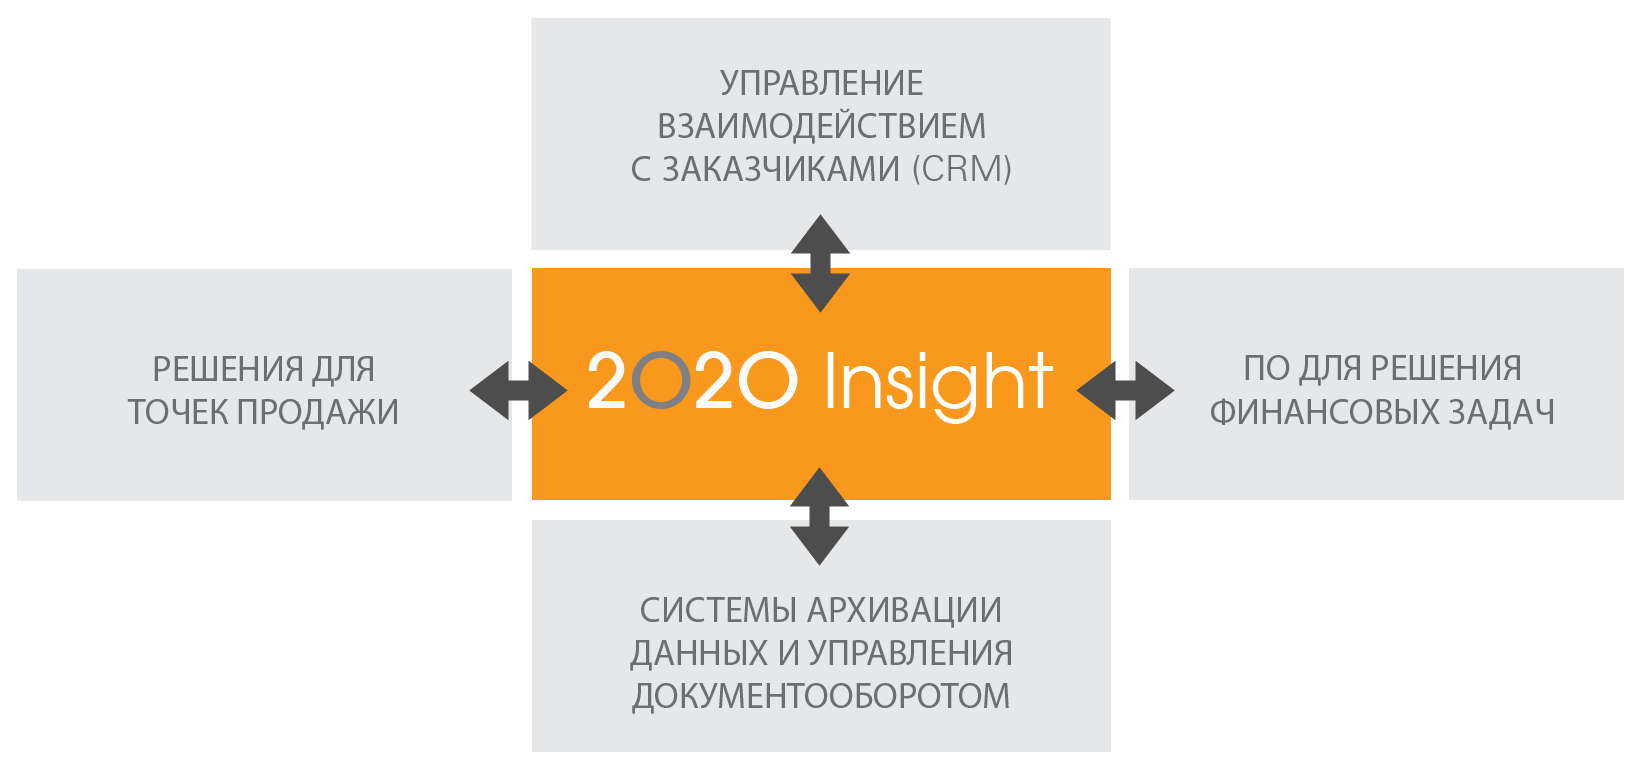 2020 Insight 2020 Insight enterprise manufacturing solution